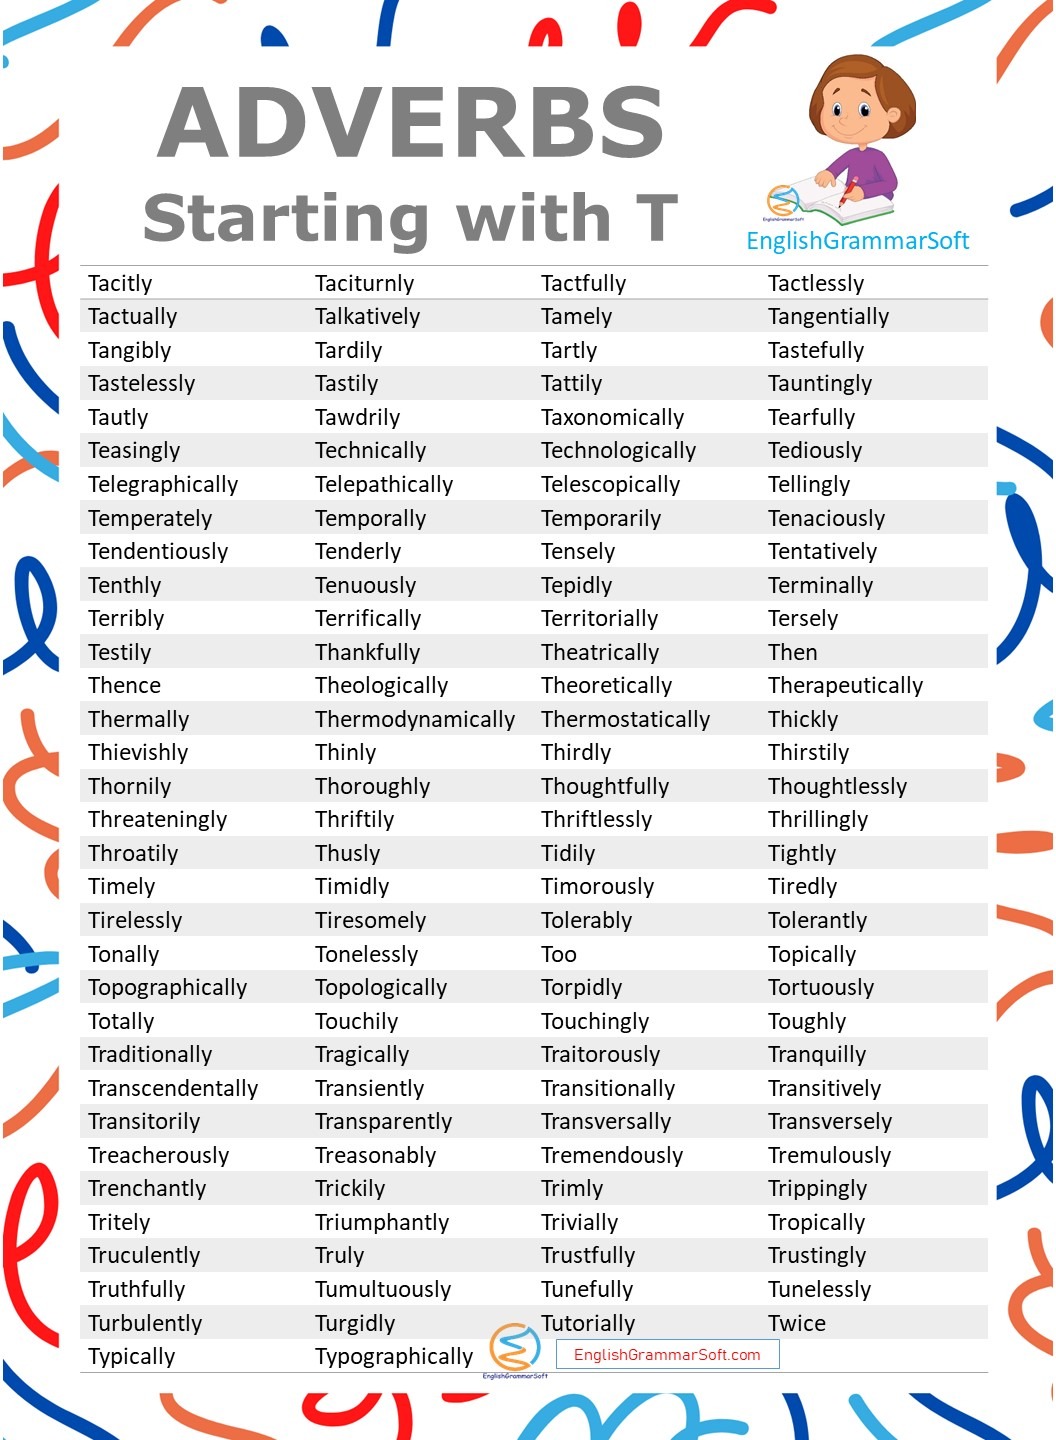 adverbs starting with T